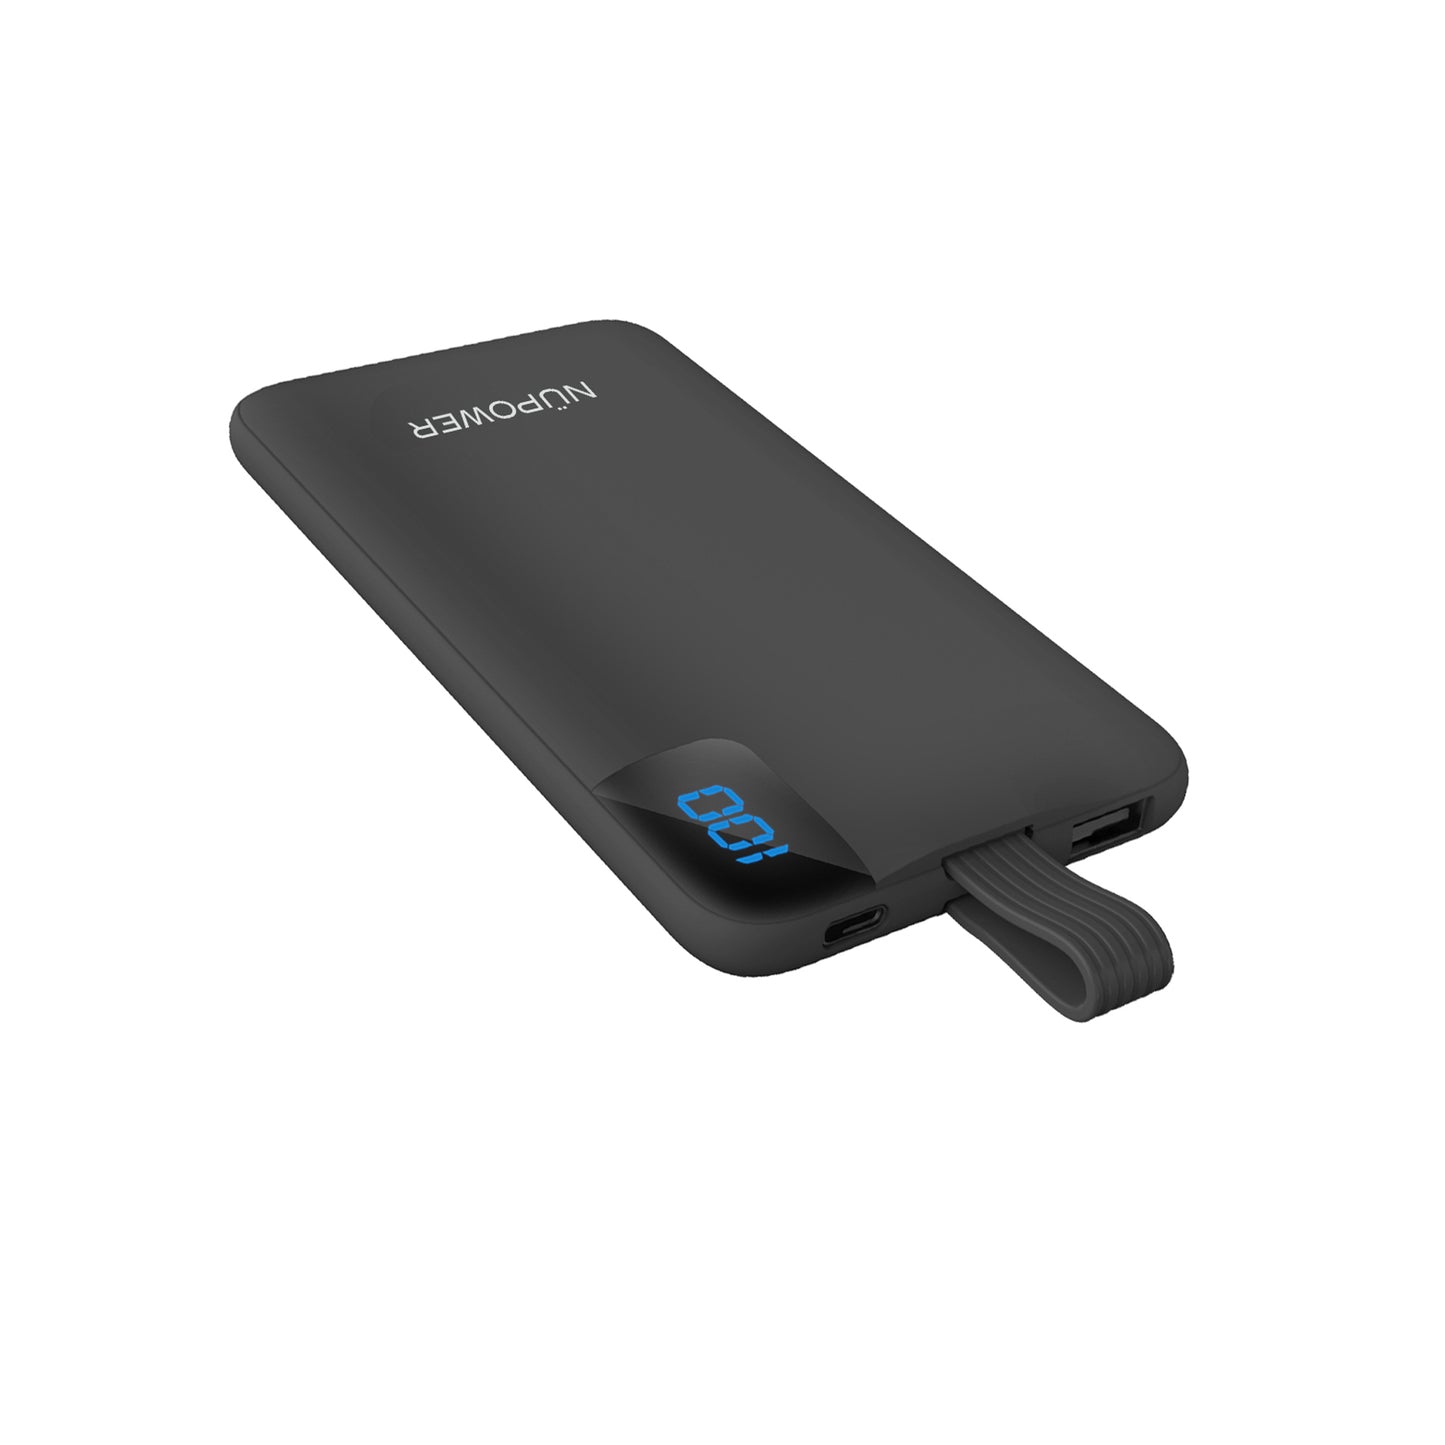 NüPower 10,000 mAh Power Bank with integrated cable